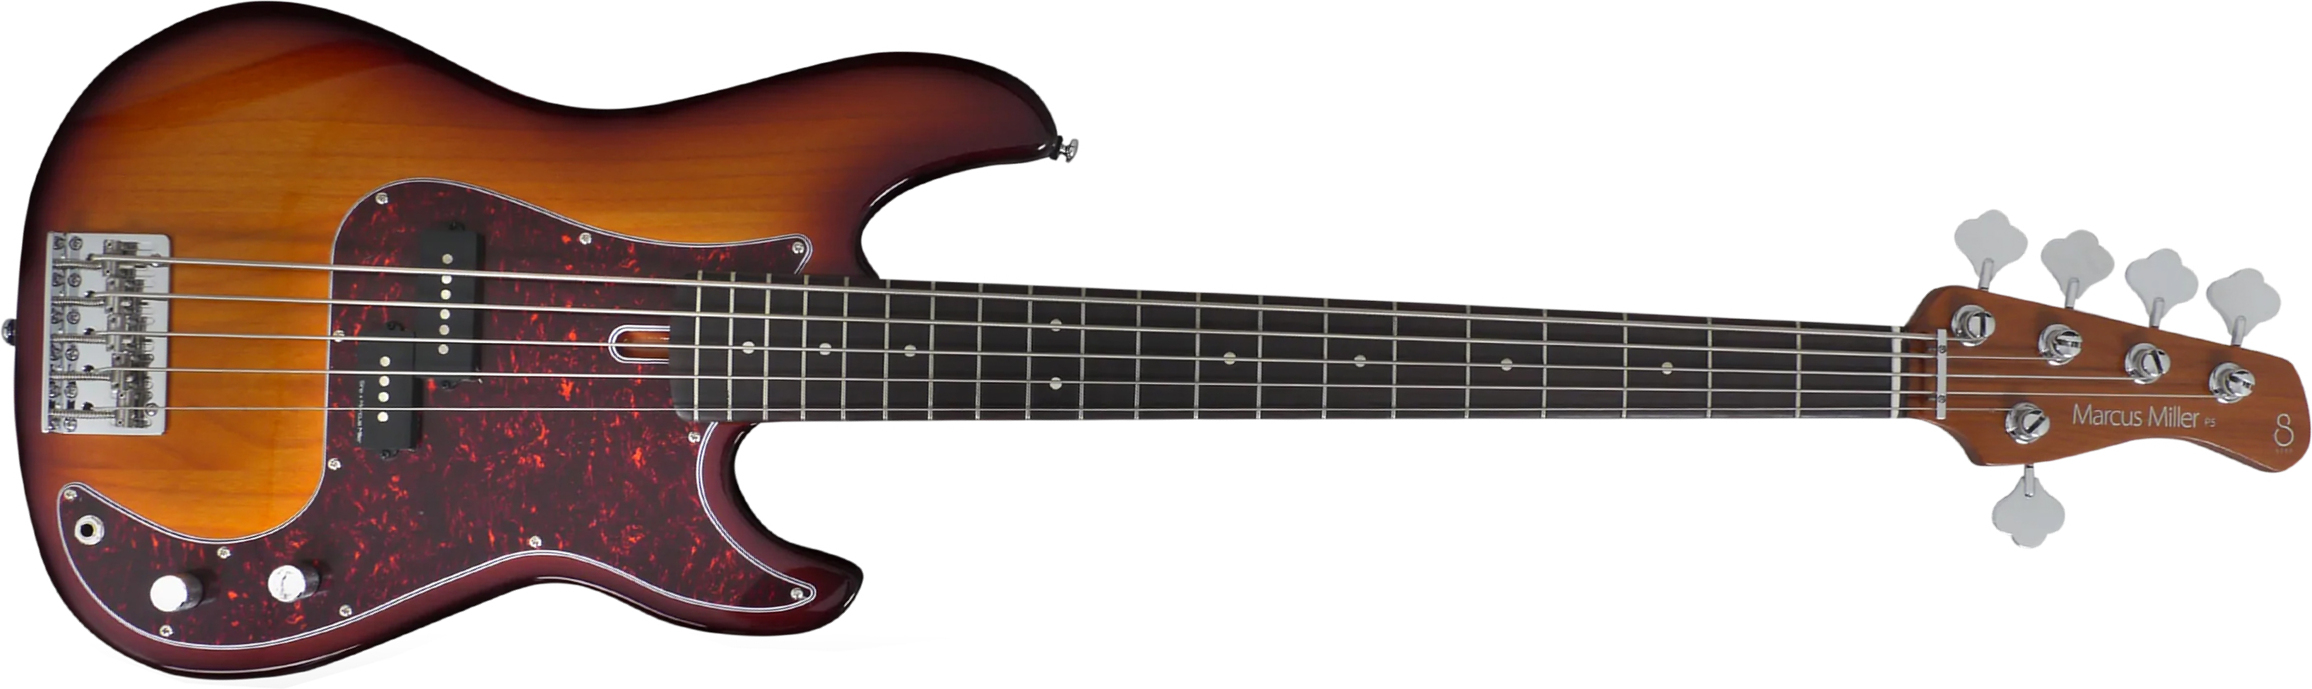 Marcus Miller P5r 5st 5c Rw - Tobacco Sunburst - Solid body electric bass - Main picture